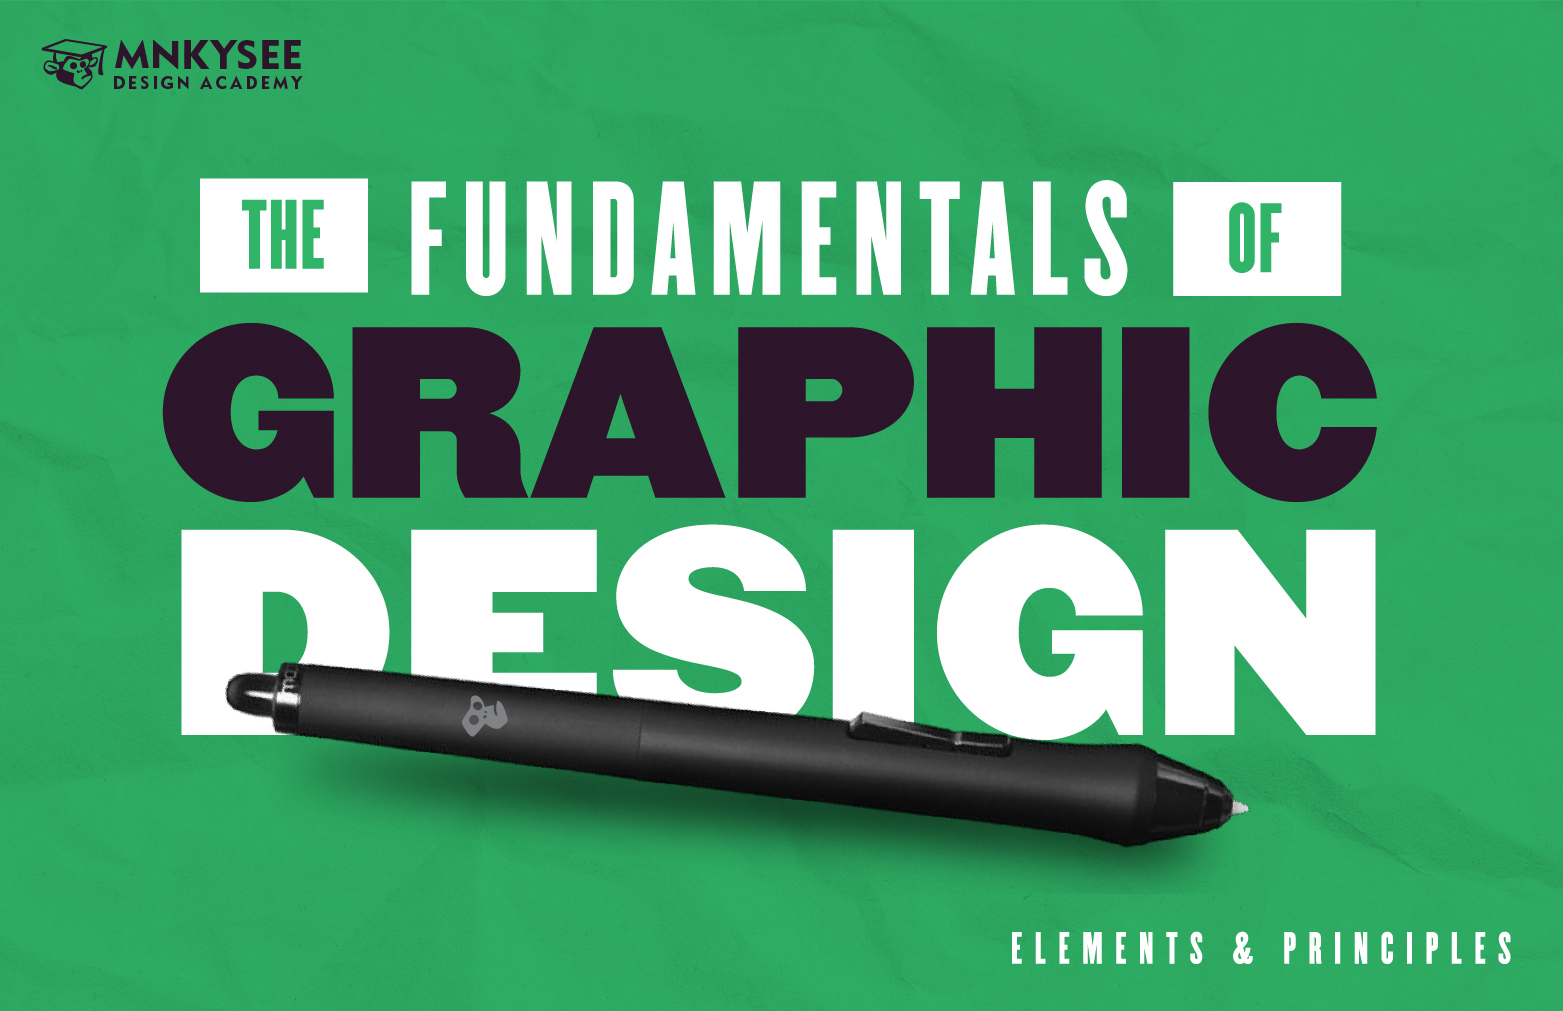 The Elements and Principles of Graphic Design Course